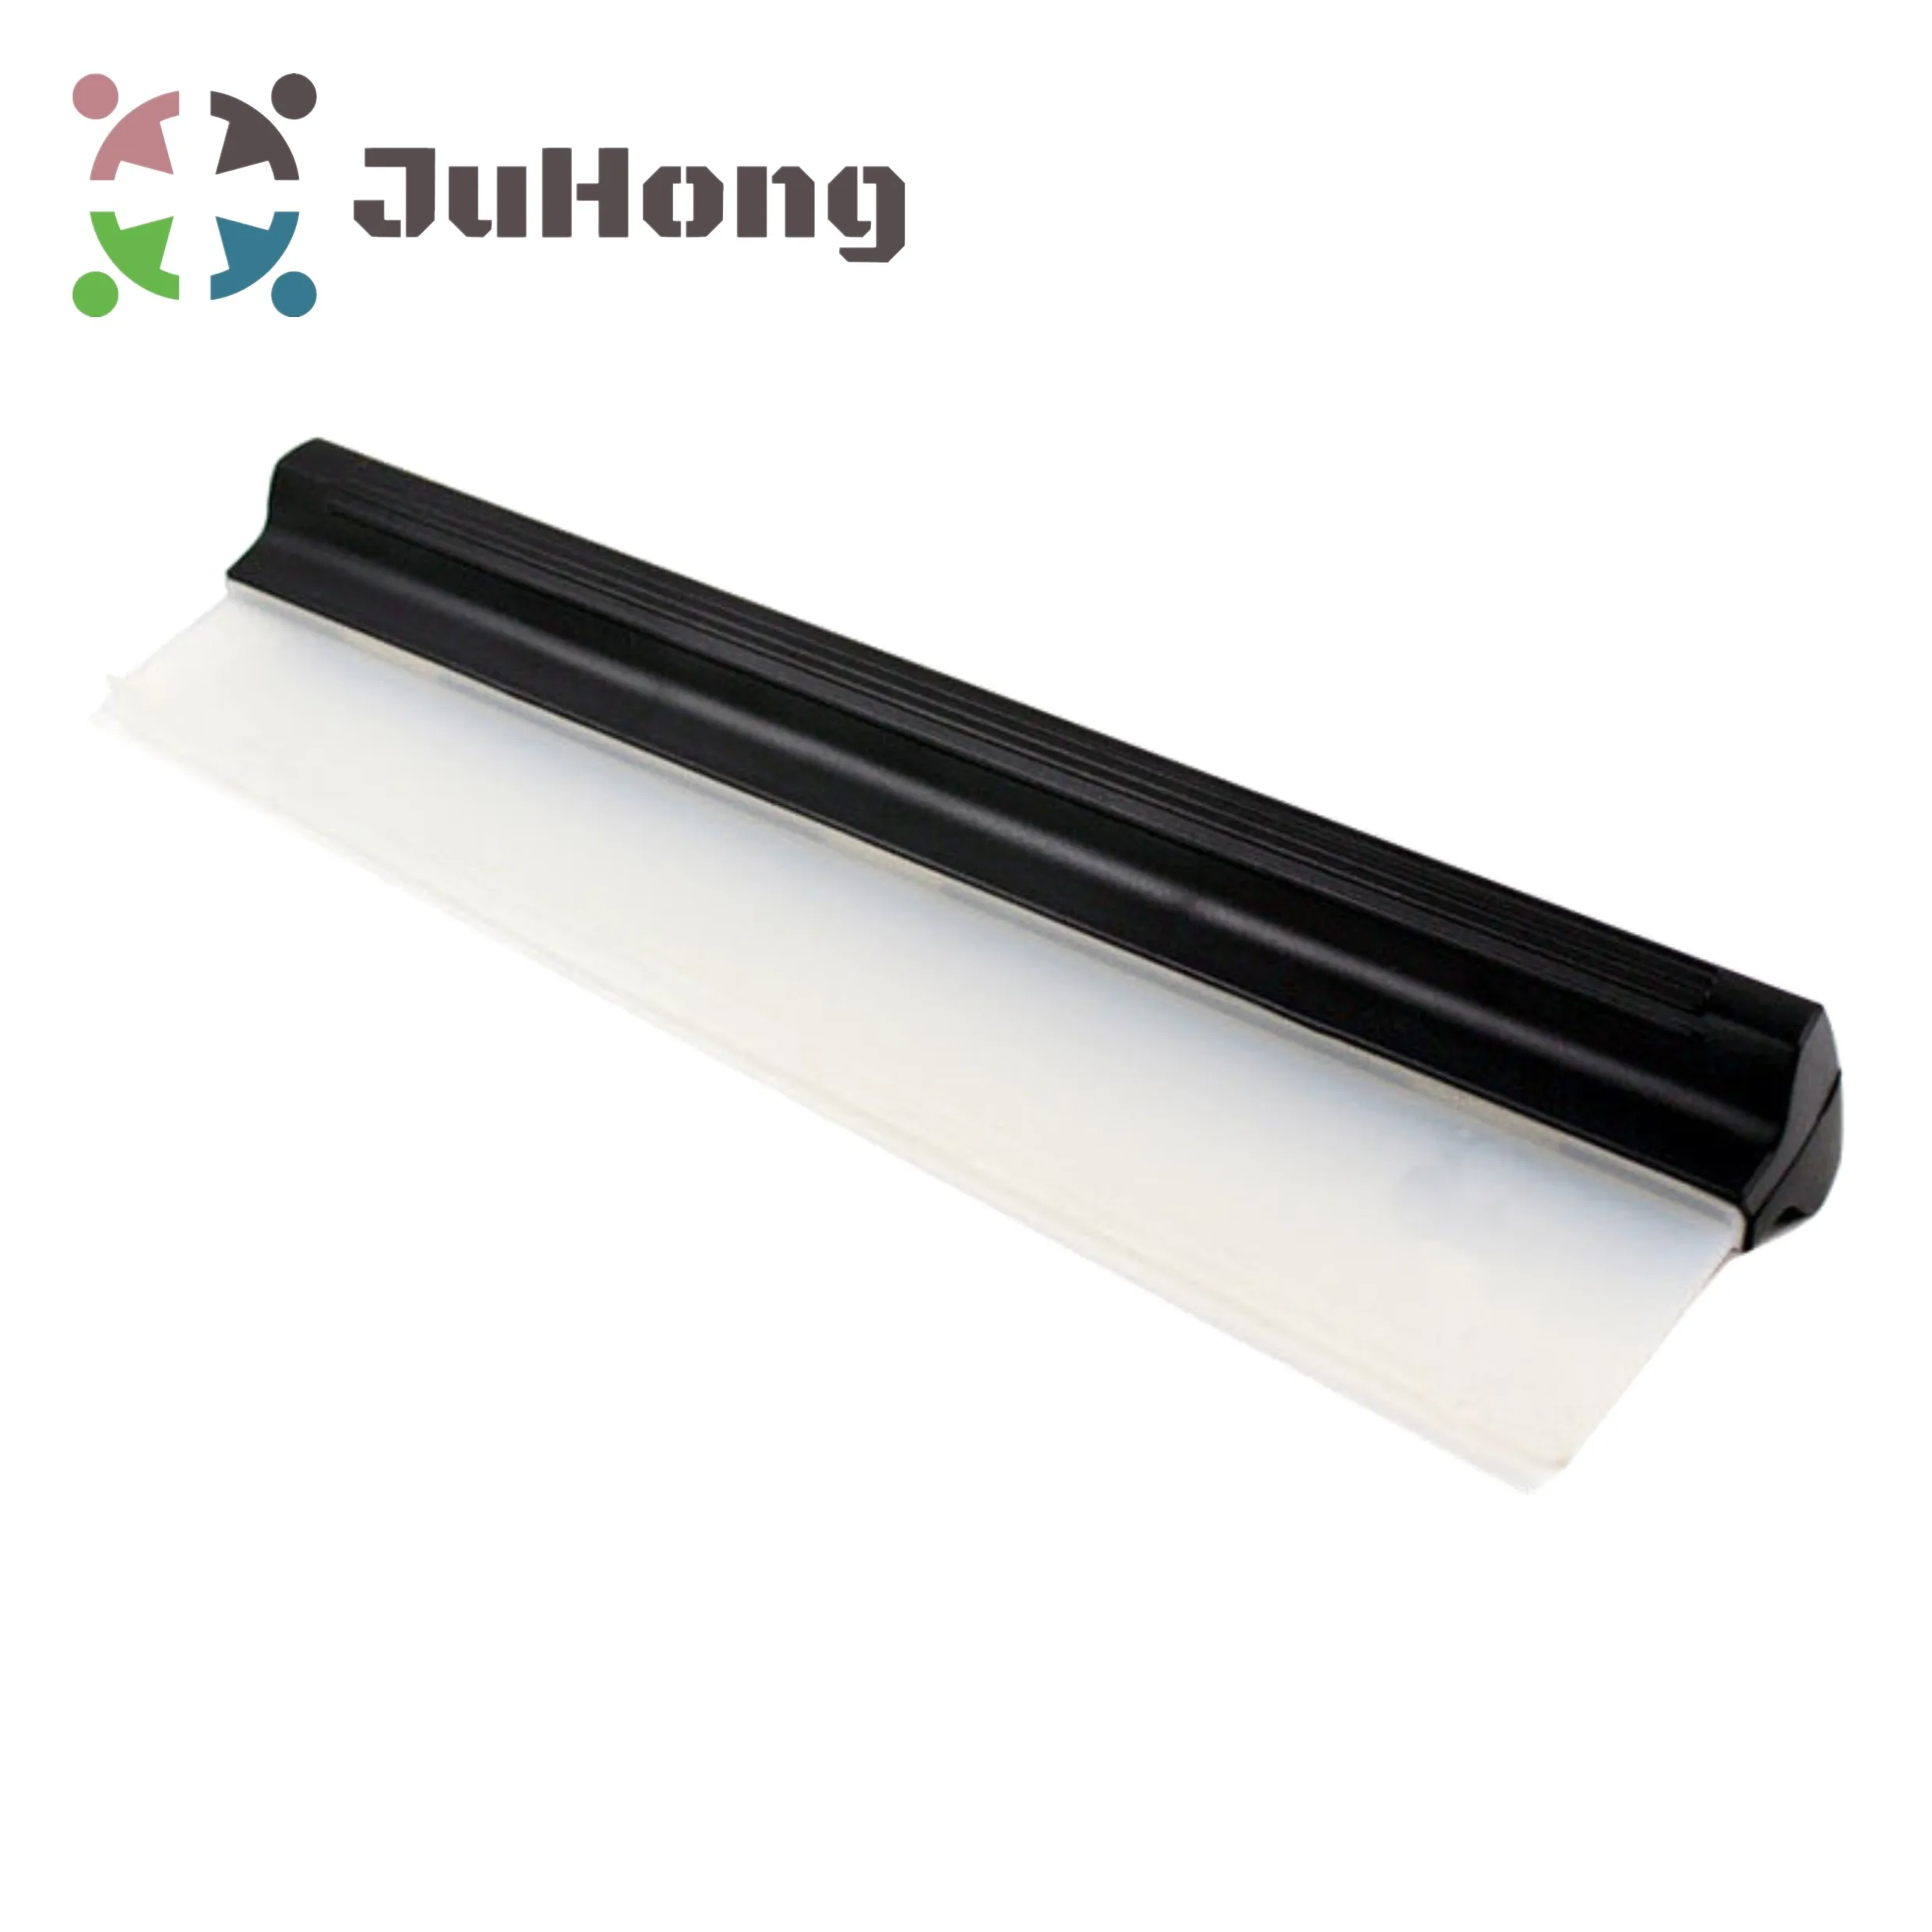 

16" All Purpose Jumbo Squeegee for Shower Window Car Glass Soft Silicone Blade Cleaning Tools Dry Water Blade Custom Color, Black bar, semi-transparent t shaped blade